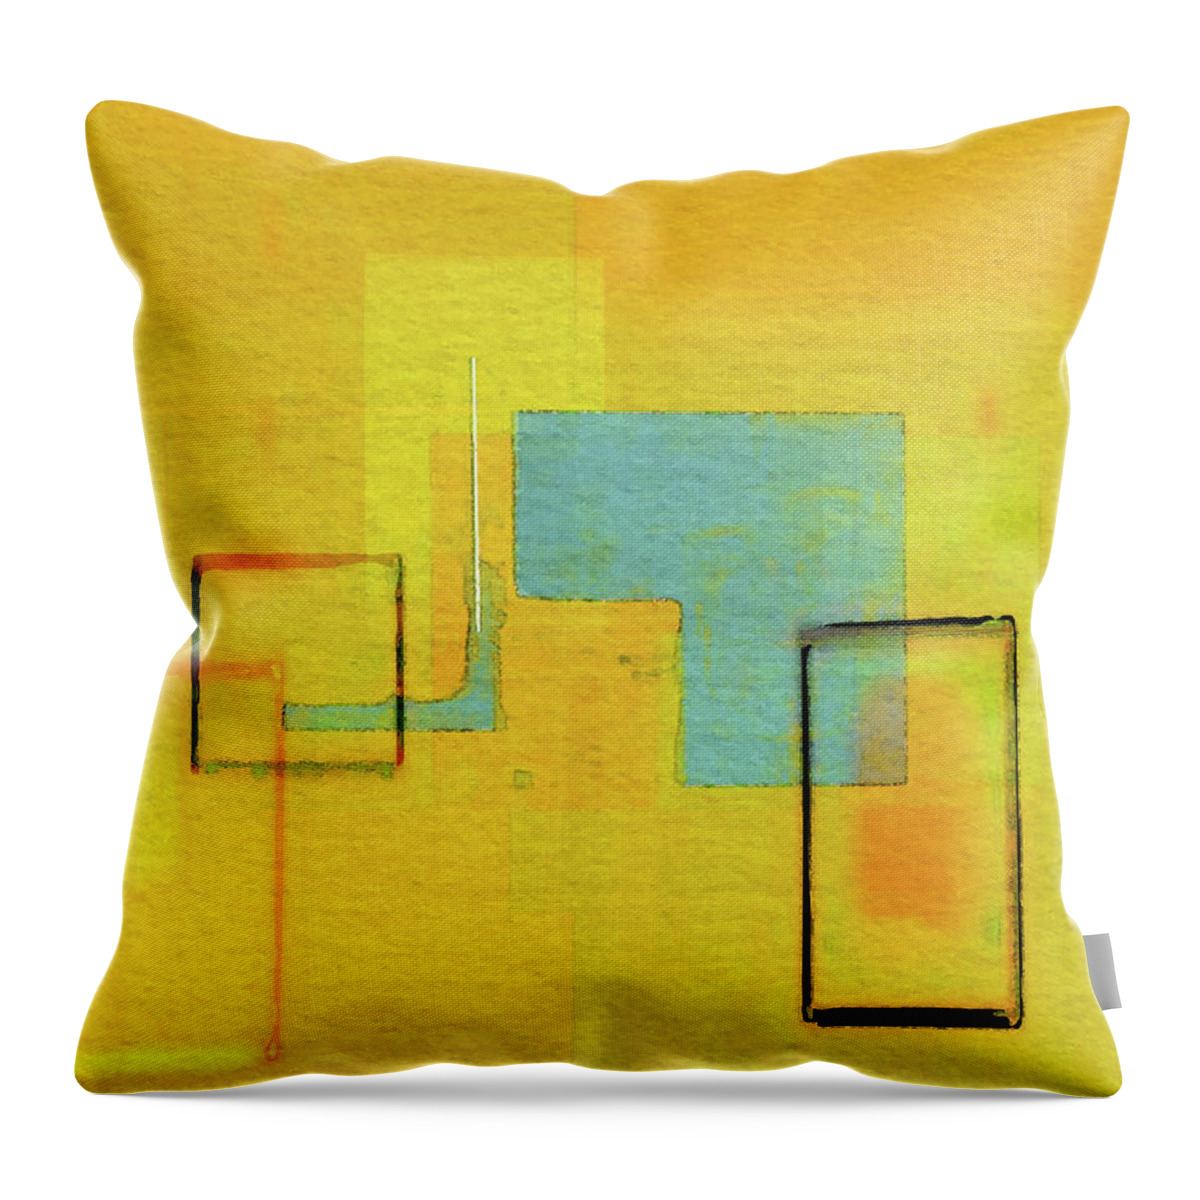 Abstract Throw Pillow featuring the digital art Fainting In Coils by Ken Walker